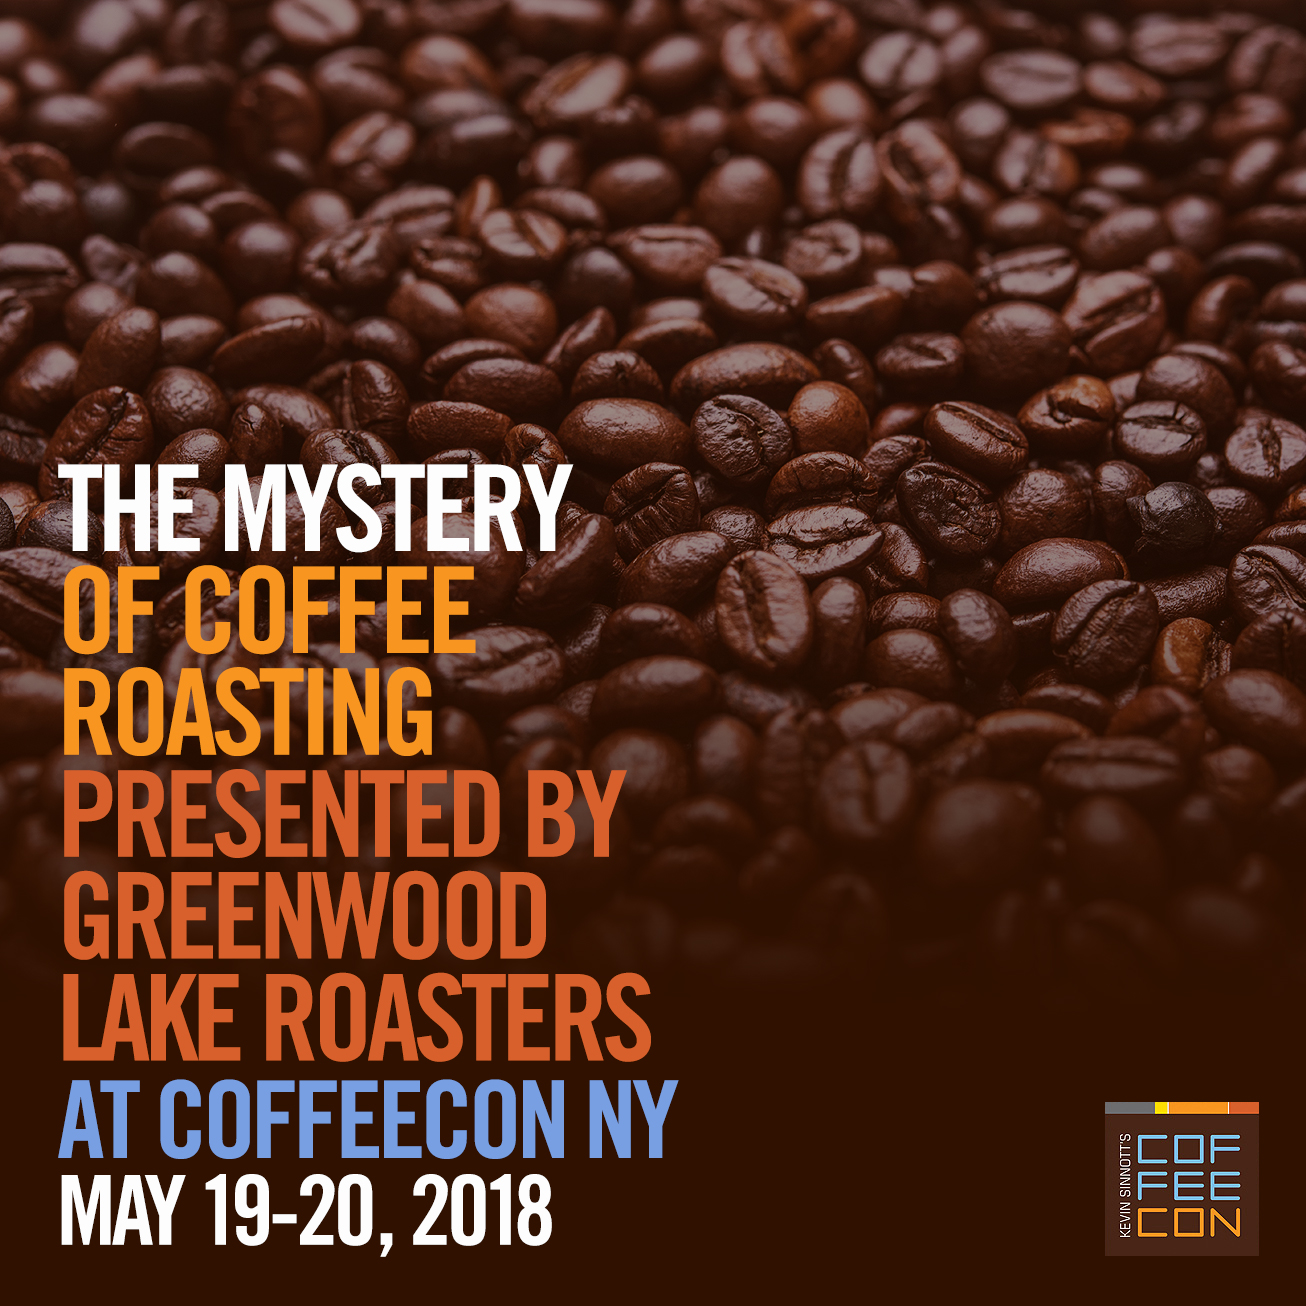 The Mystery of Coffee Roasting with Greenwood Lake Roasters